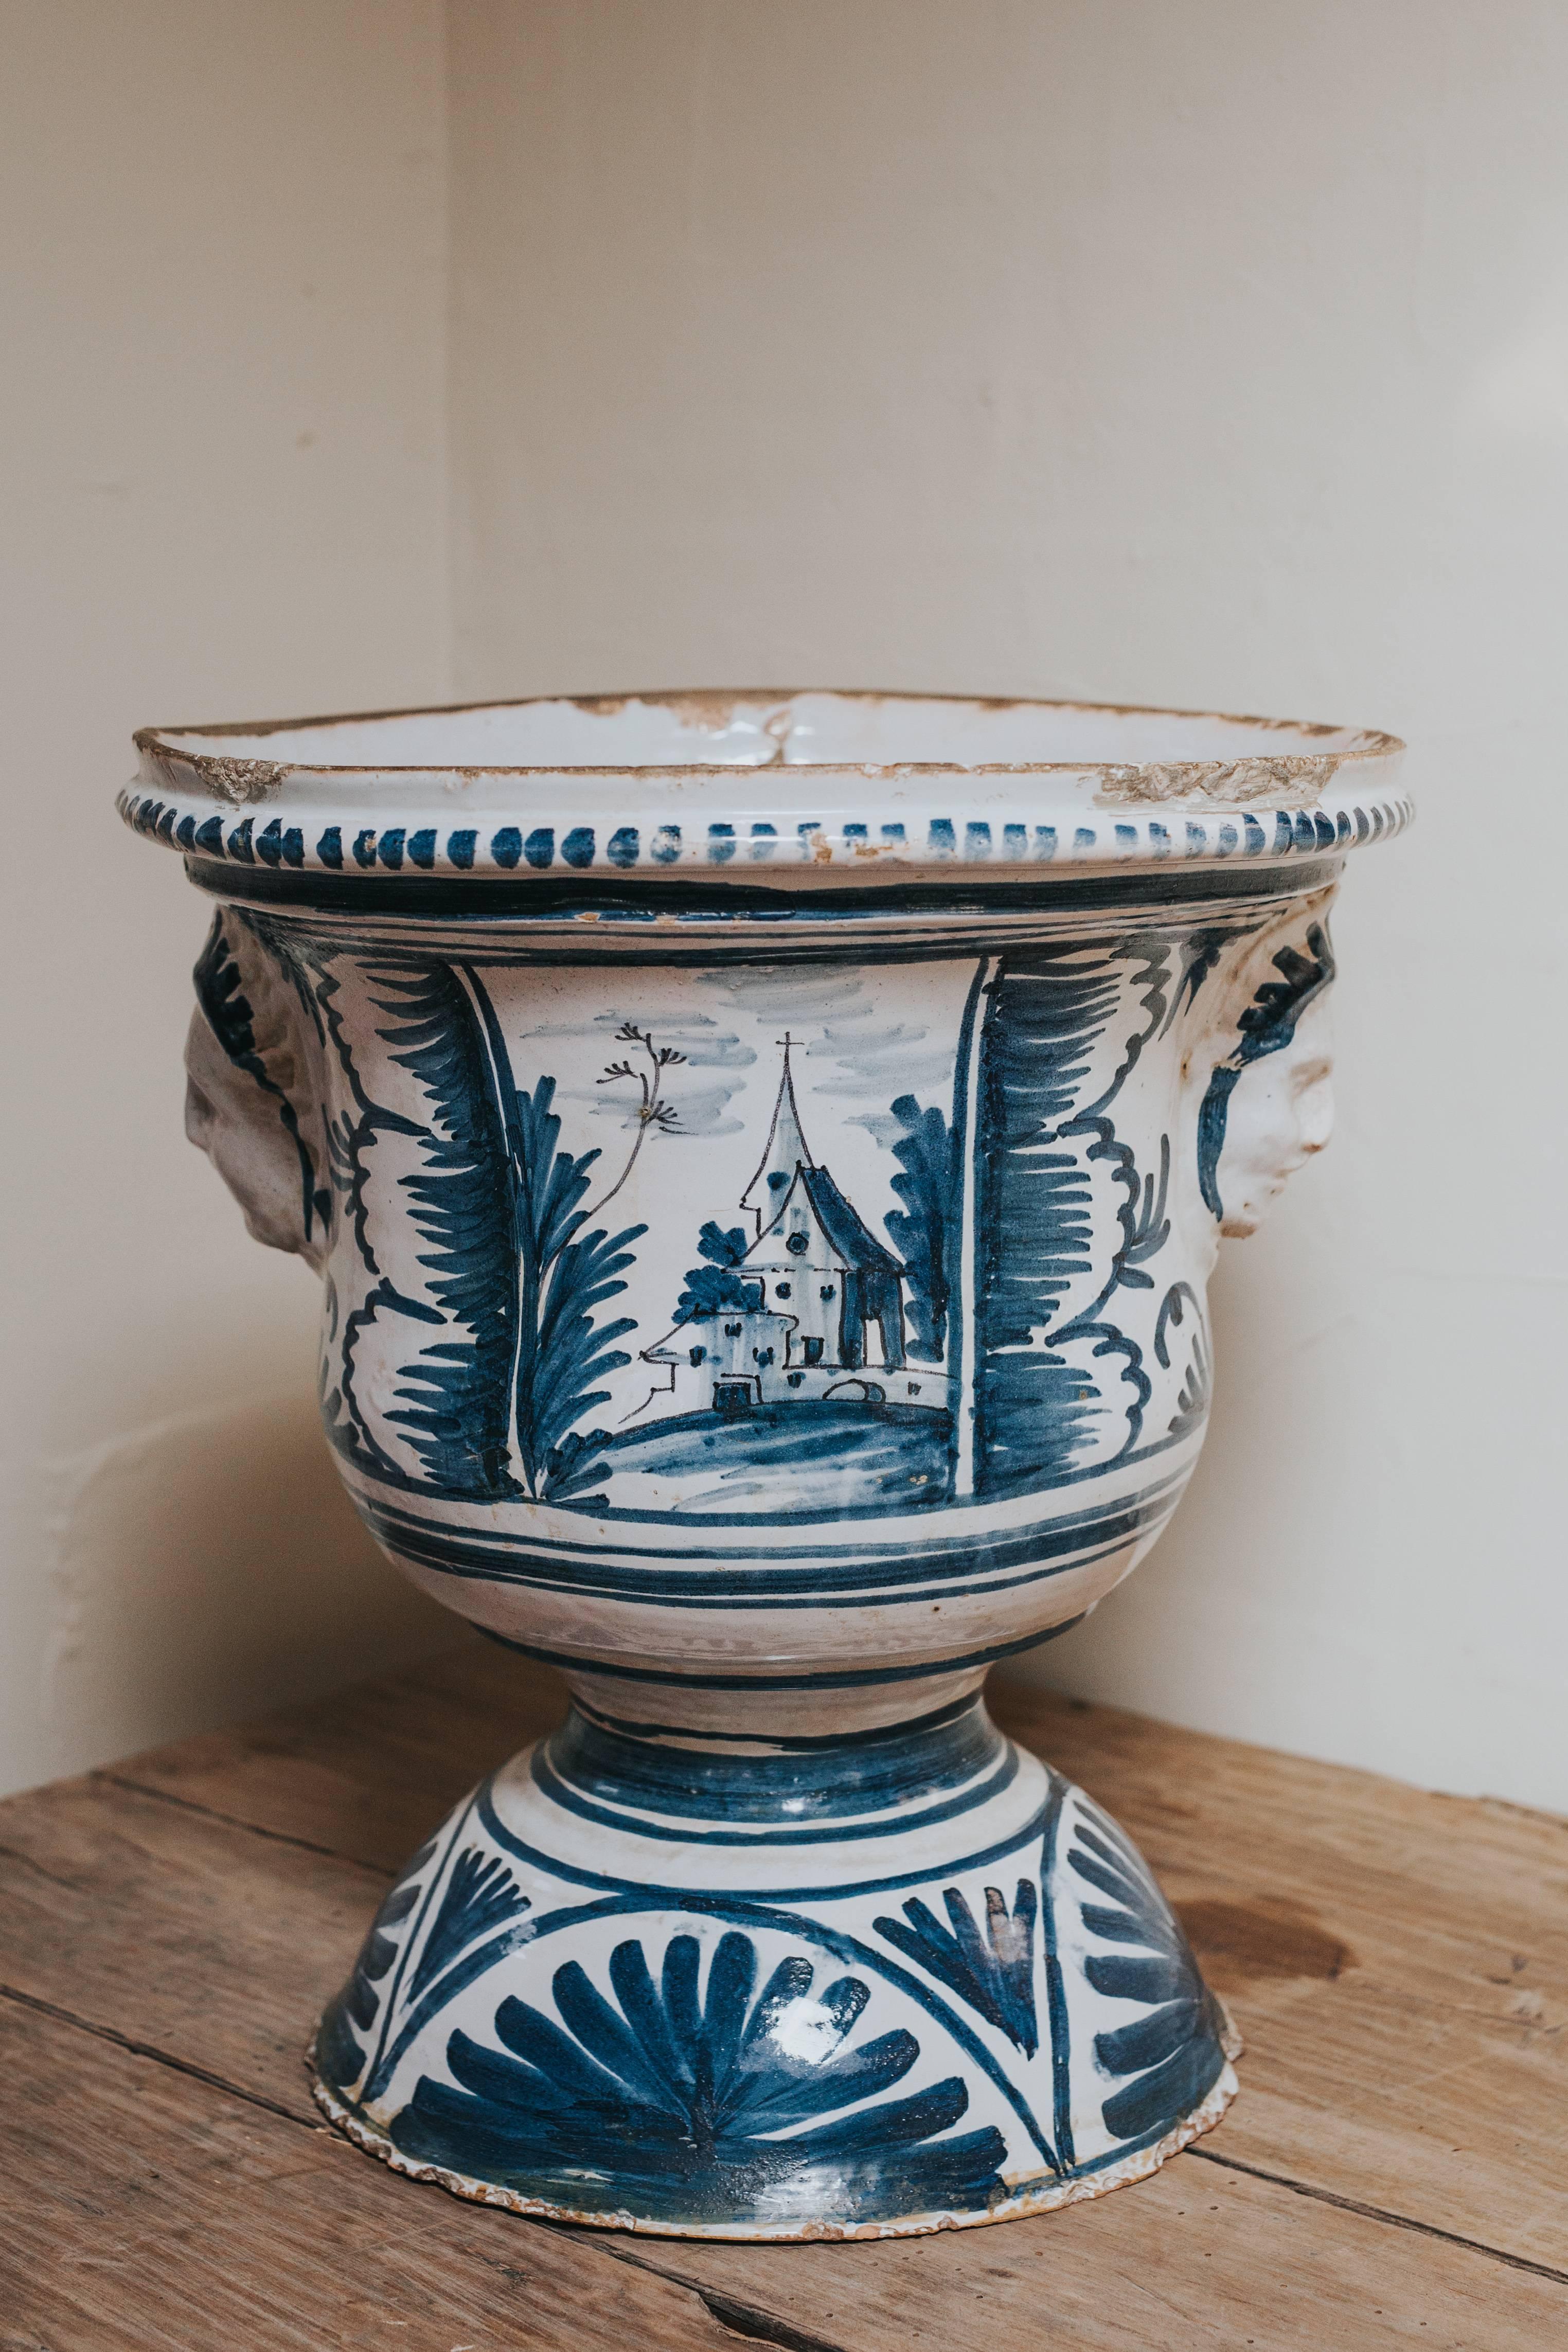 This is an earthenware blue and white jardinière, made in Nevers/France during the 18th century.